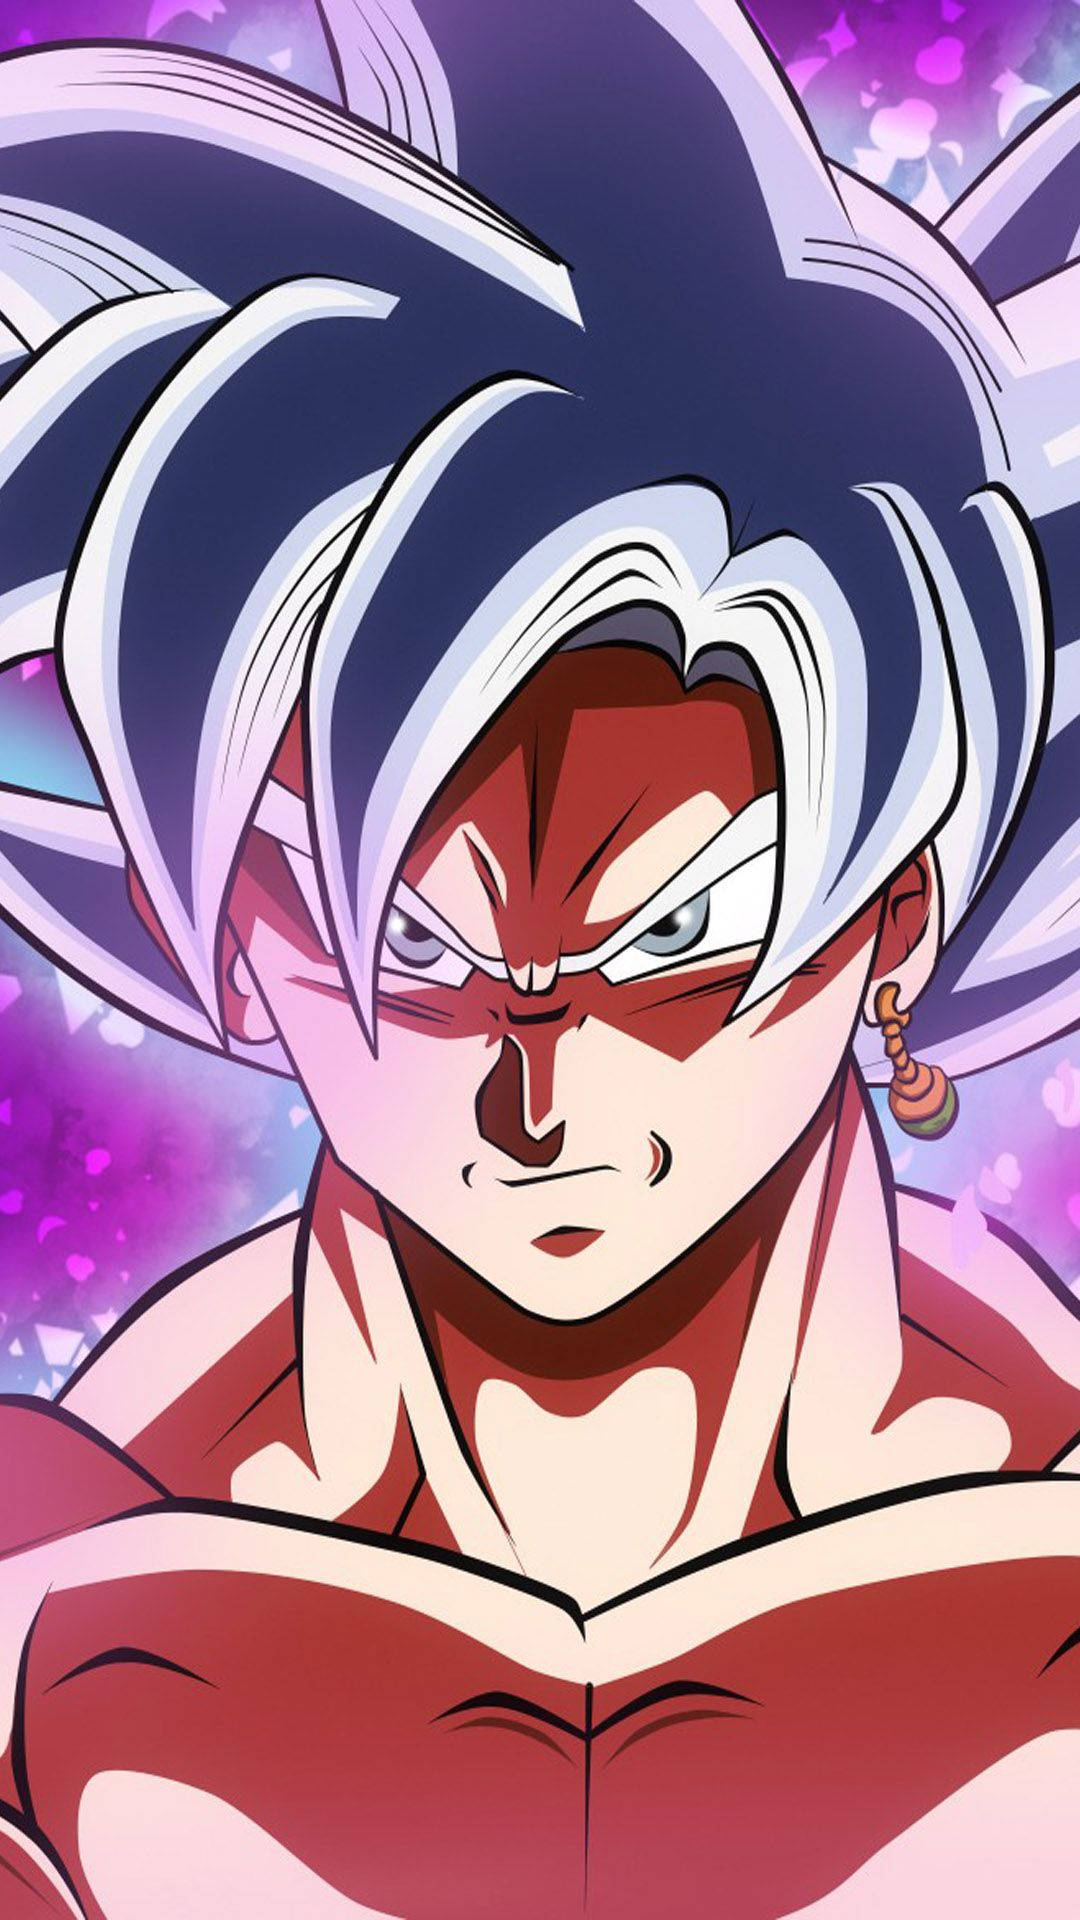 Goku takes on all challengers Wallpaper